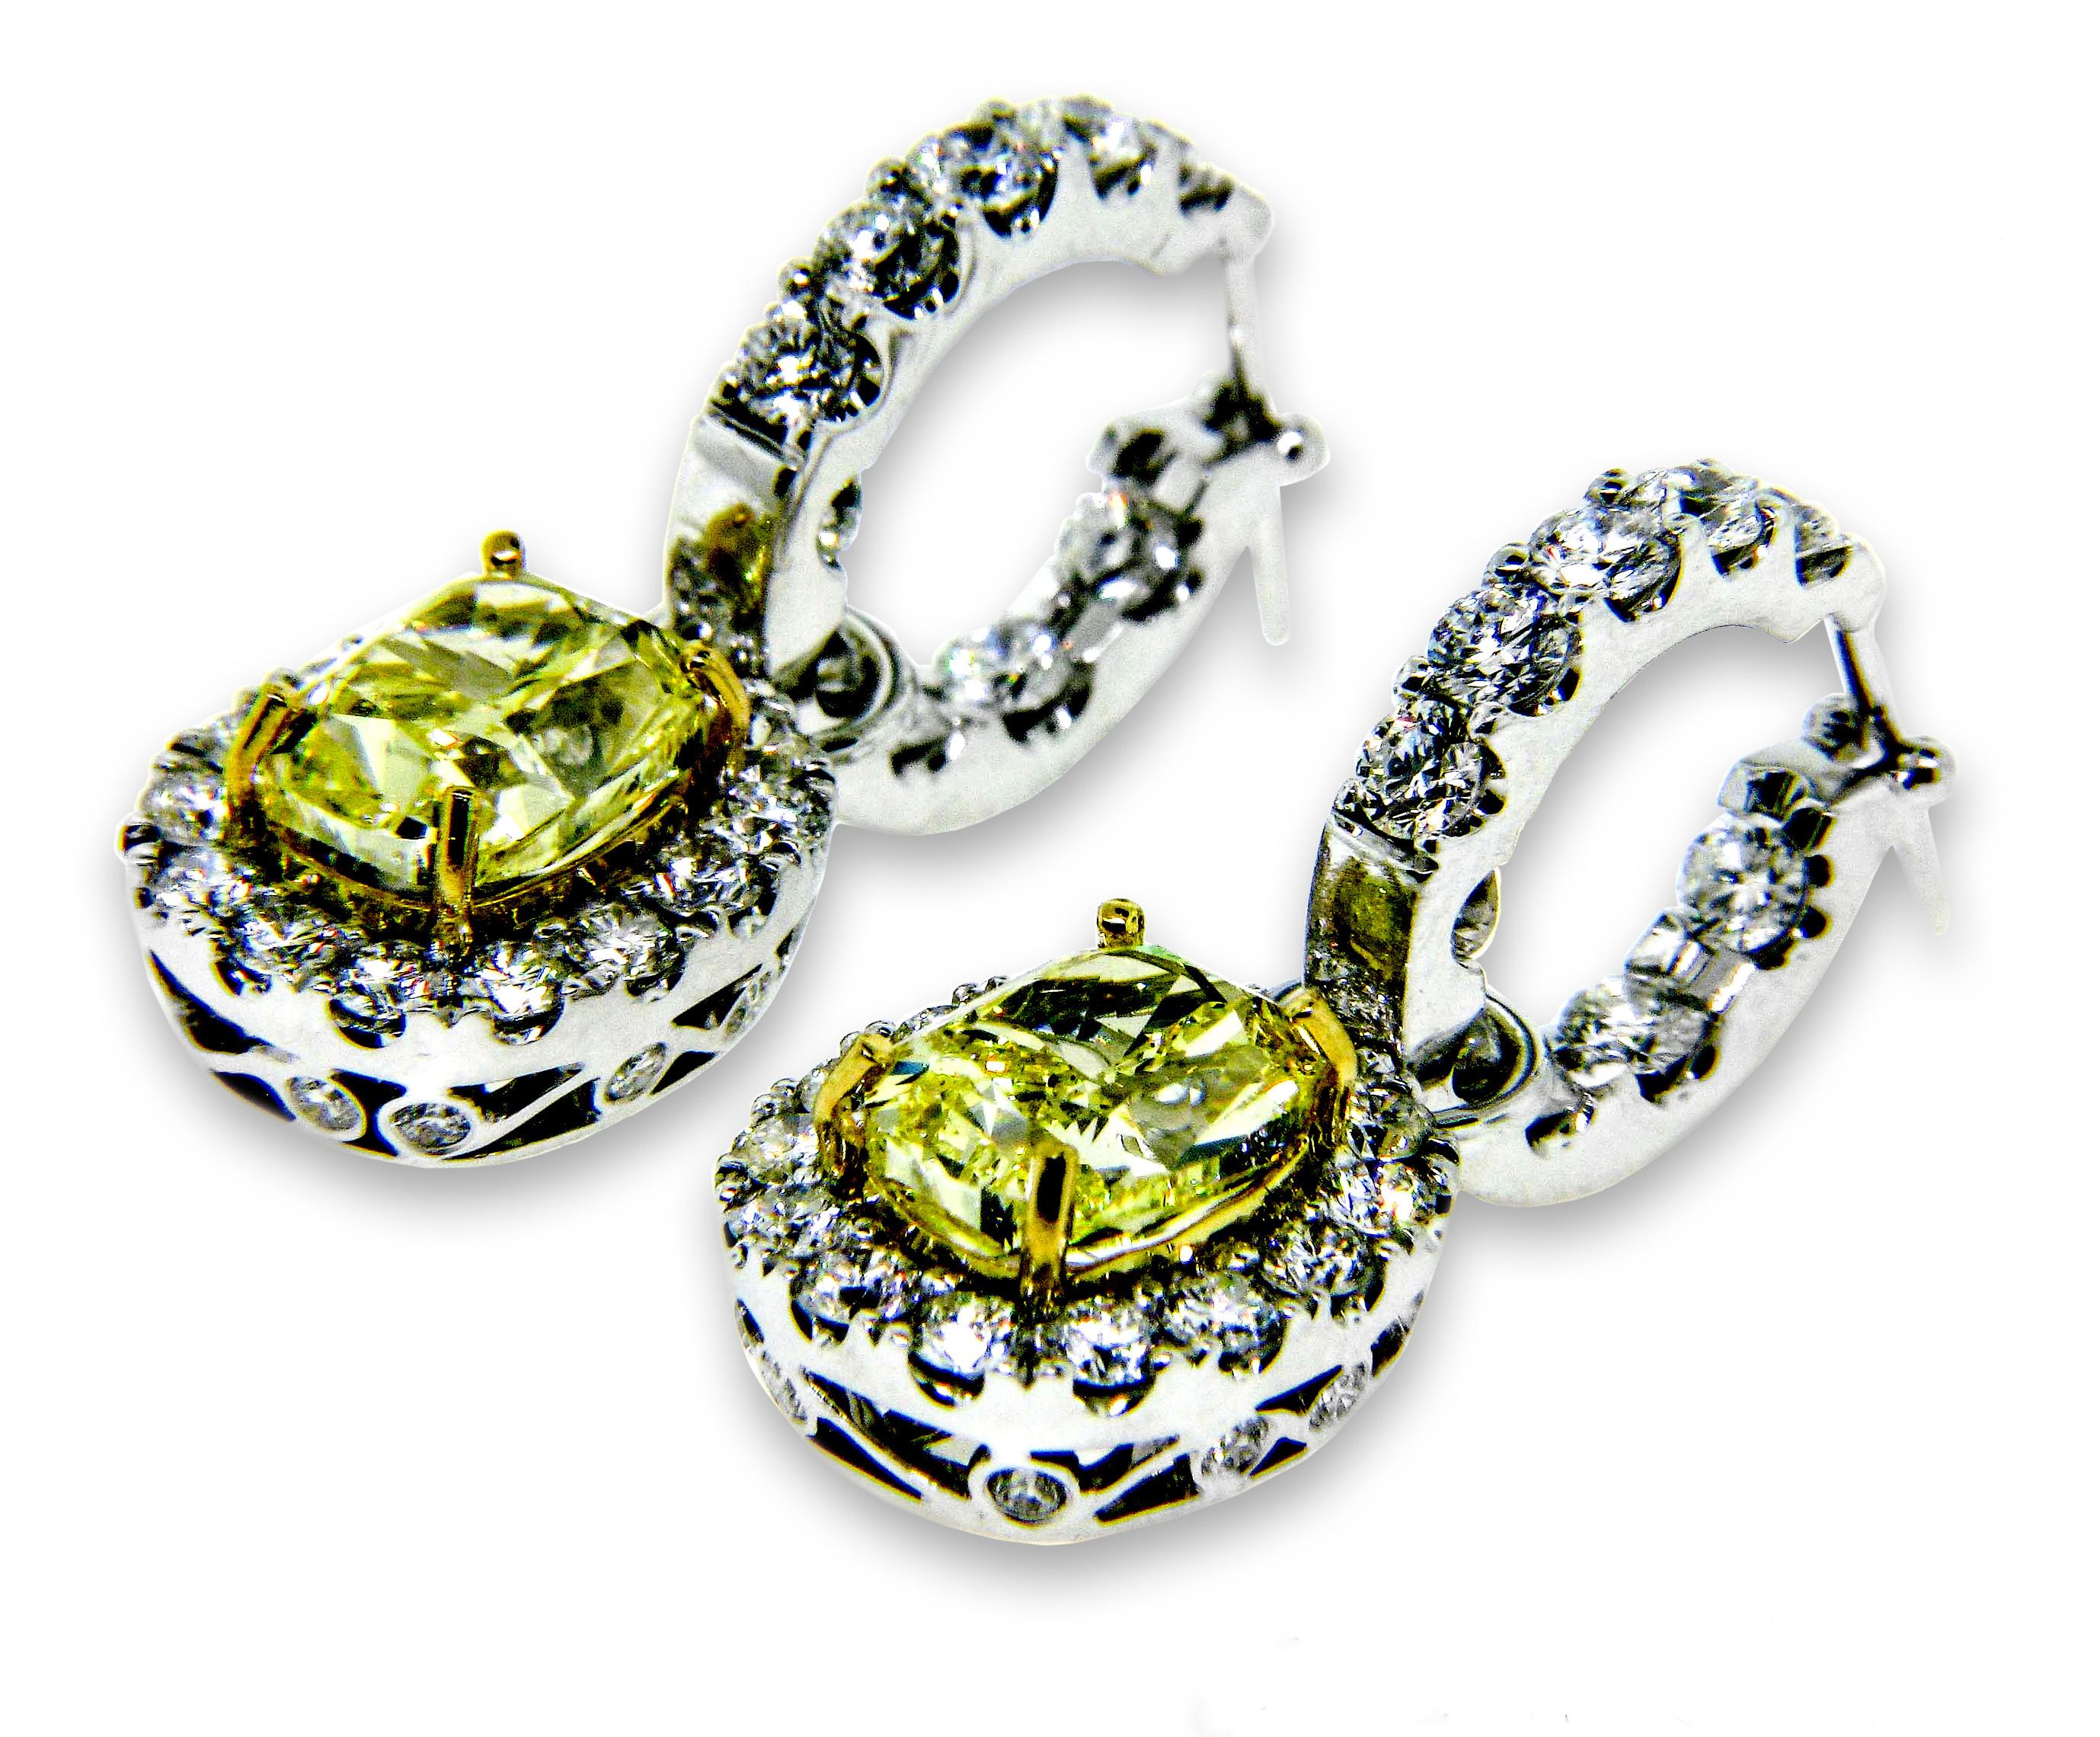 18 karat White Gold hoop earrings, designed by world-renowned jewelry designer, Danuta, with detachable pendants which are set with two GIA Certified Oval Fancy Intense Yellow/VS2 Diamonds weighing 3.03 carats and 2.83 carats with 1.80 carat total